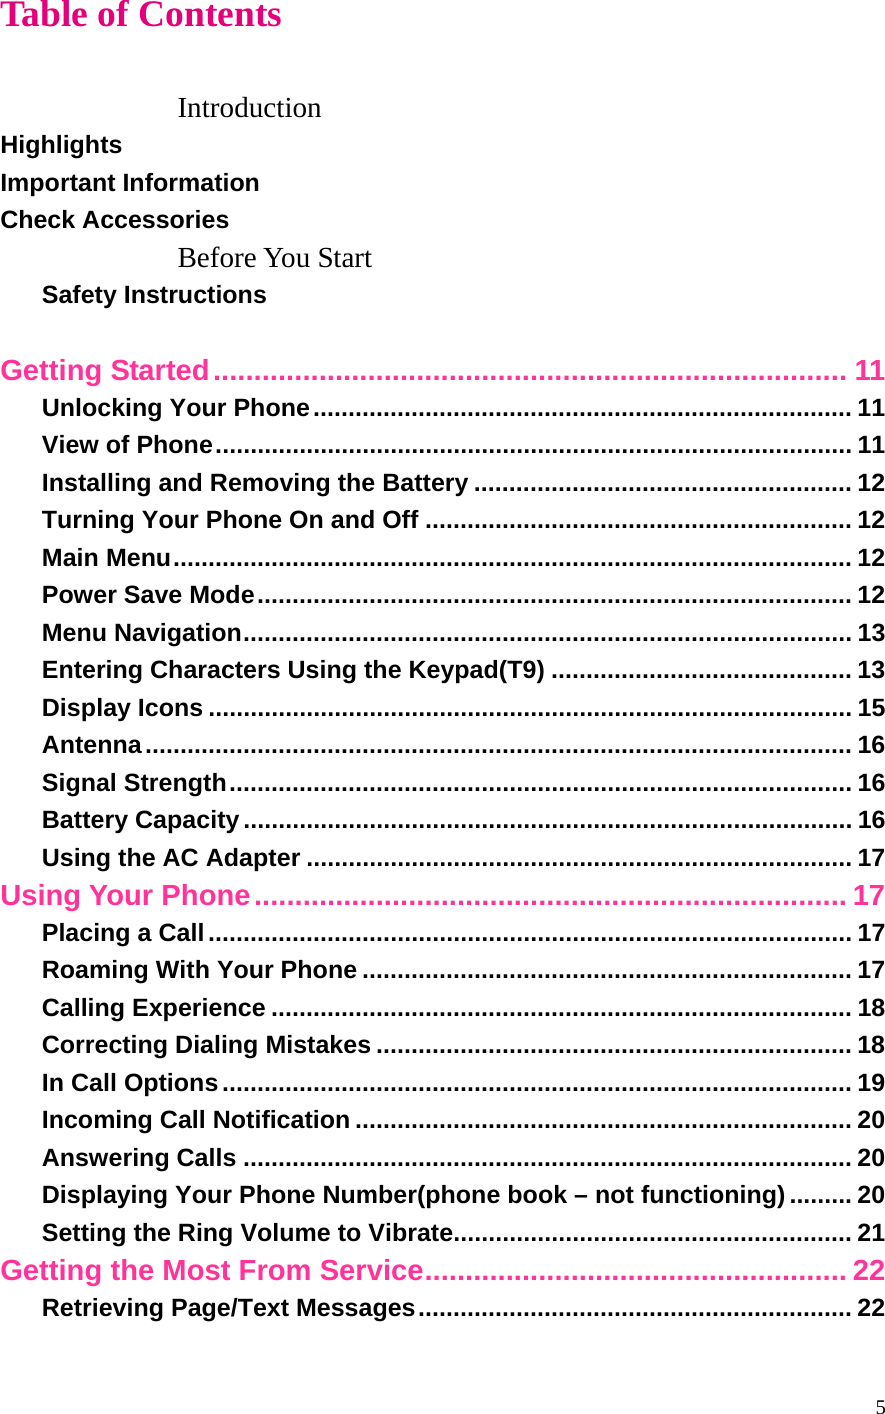 5 Table of Contents  Introduction Highlights Important Information Check Accessories Before You Start Safety Instructions  Getting Started.............................................................................. 11 Unlocking Your Phone............................................................................. 11 View of Phone........................................................................................... 11 Installing and Removing the Battery ...................................................... 12 Turning Your Phone On and Off ............................................................. 12 Main Menu................................................................................................. 12 Power Save Mode..................................................................................... 12 Menu Navigation....................................................................................... 13 Entering Characters Using the Keypad(T9) ........................................... 13 Display Icons ............................................................................................ 15 Antenna..................................................................................................... 16 Signal Strength......................................................................................... 16 Battery Capacity....................................................................................... 16 Using the AC Adapter .............................................................................. 17 Using Your Phone......................................................................... 17 Placing a Call............................................................................................ 17 Roaming With Your Phone ...................................................................... 17 Calling Experience ................................................................................... 18 Correcting Dialing Mistakes .................................................................... 18 In Call Options.......................................................................................... 19 Incoming Call Notification ....................................................................... 20 Answering Calls ....................................................................................... 20 Displaying Your Phone Number(phone book – not functioning)......... 20 Setting the Ring Volume to Vibrate......................................................... 21 Getting the Most From Service.................................................... 22 Retrieving Page/Text Messages.............................................................. 22 